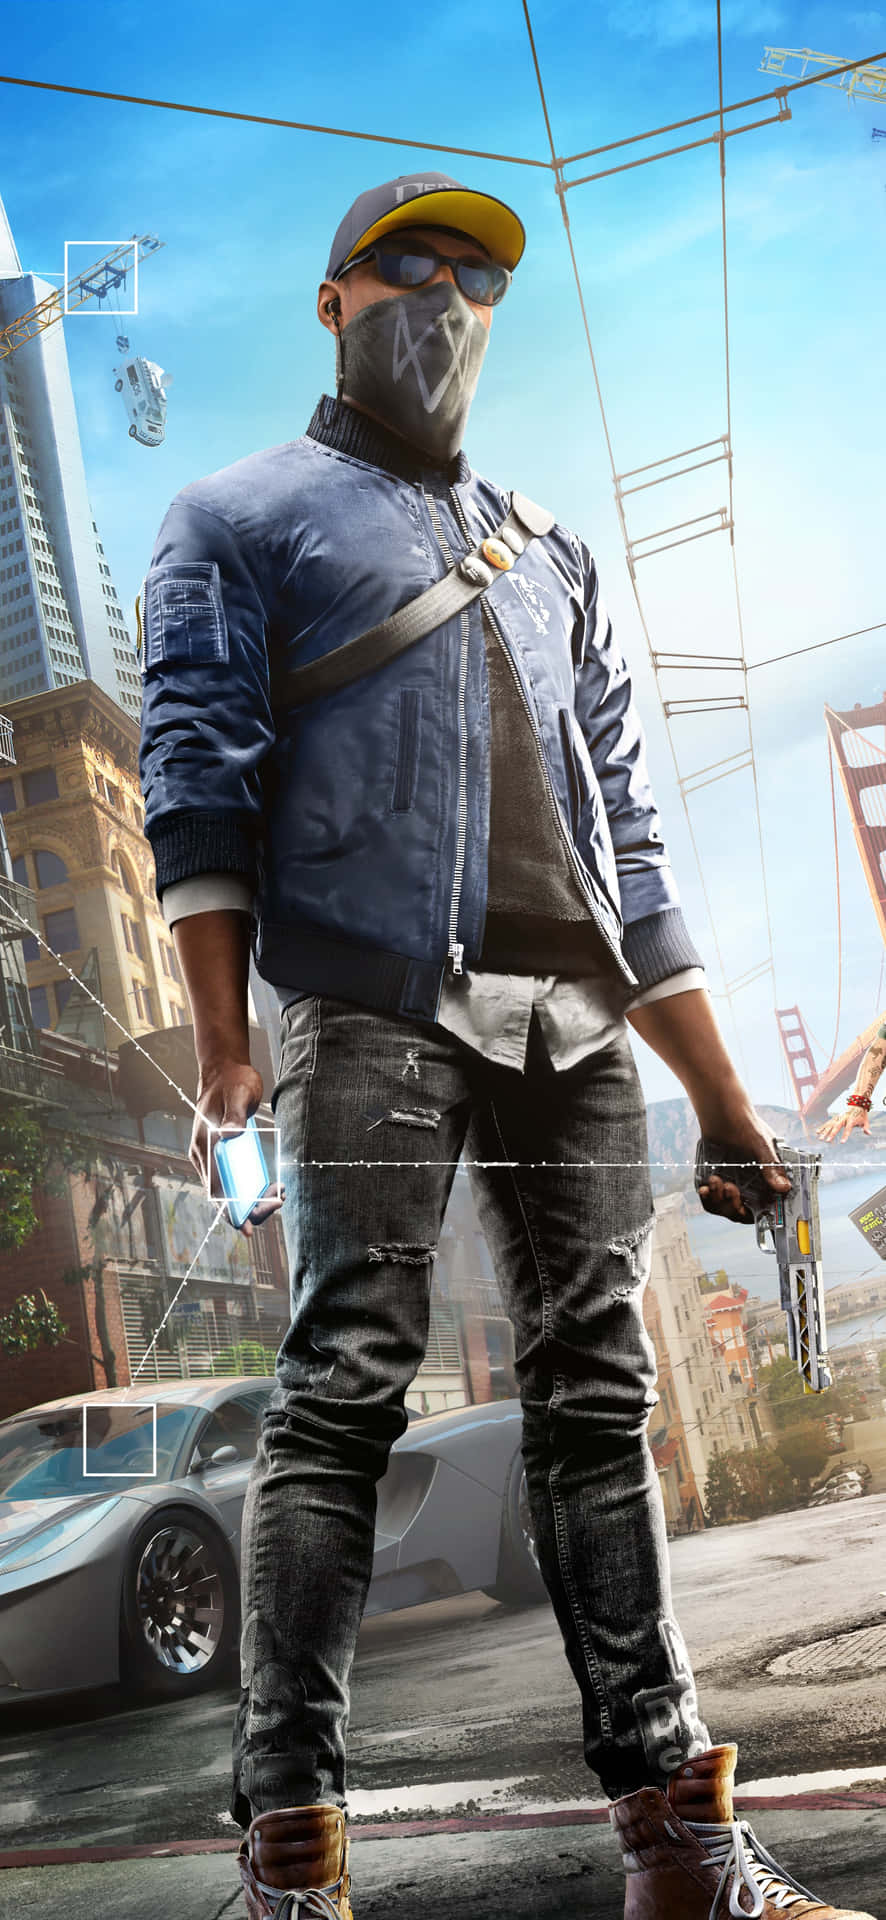 Watch Dogs 2 Pc - Pc Game Download Wallpaper